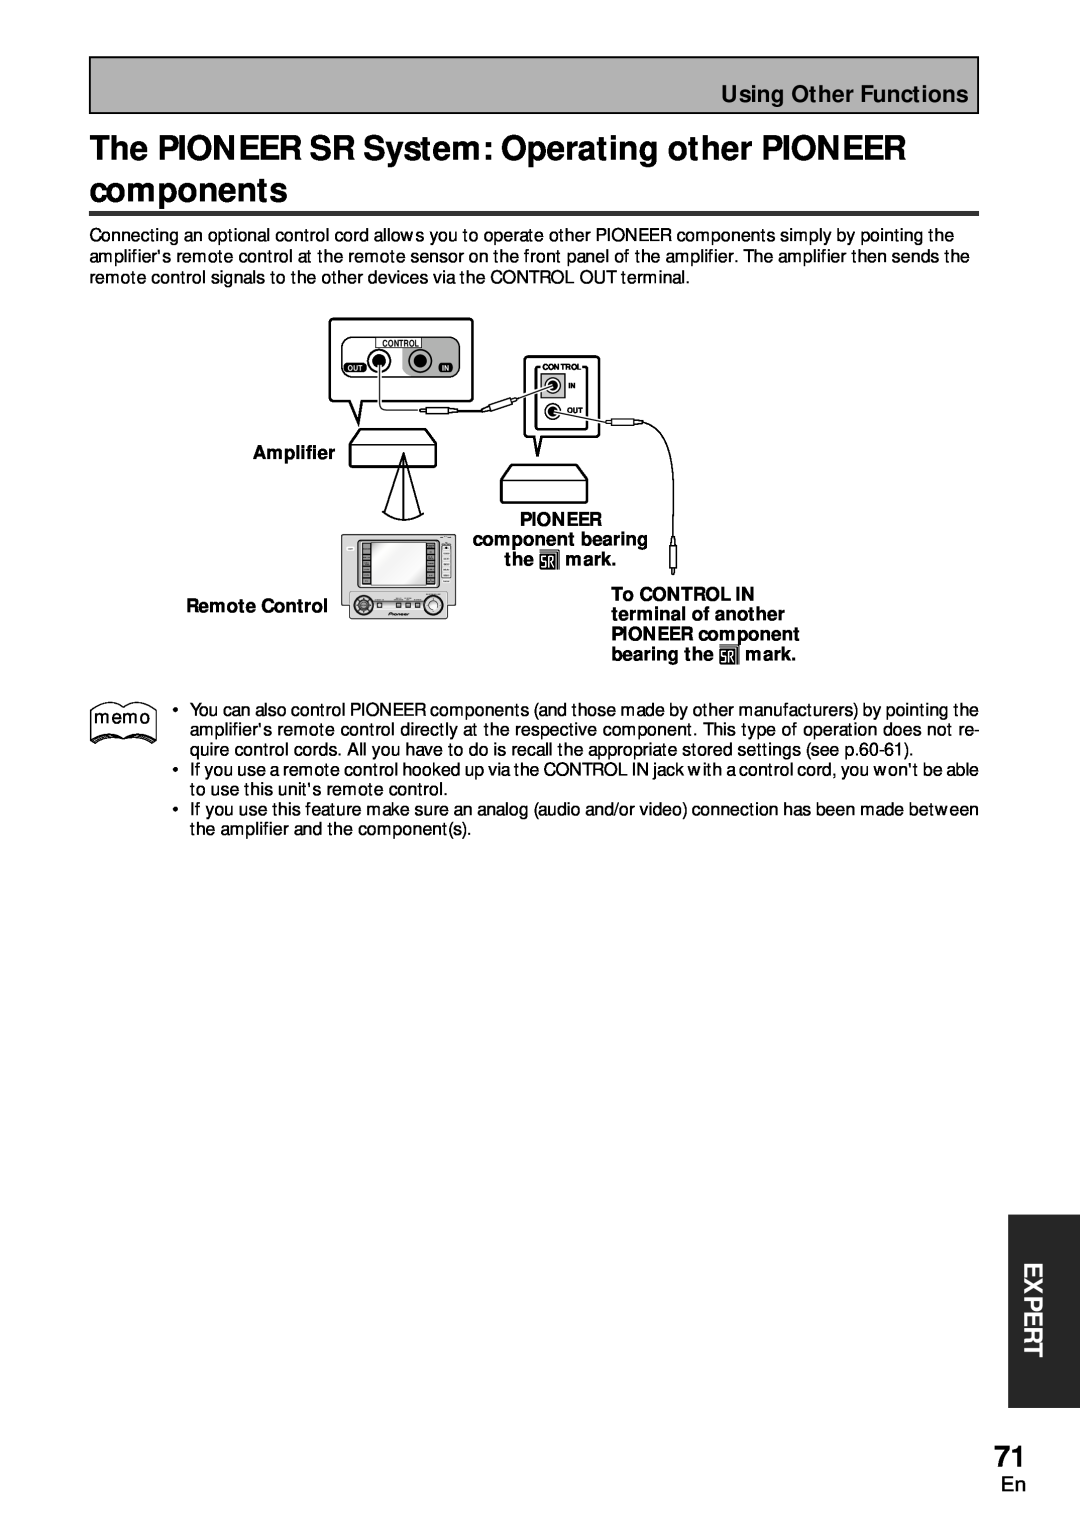 Pioneer VSA-AX10 operating instructions Expert, Amplifier Remote Control, PIONEER component bearing the Î mark 